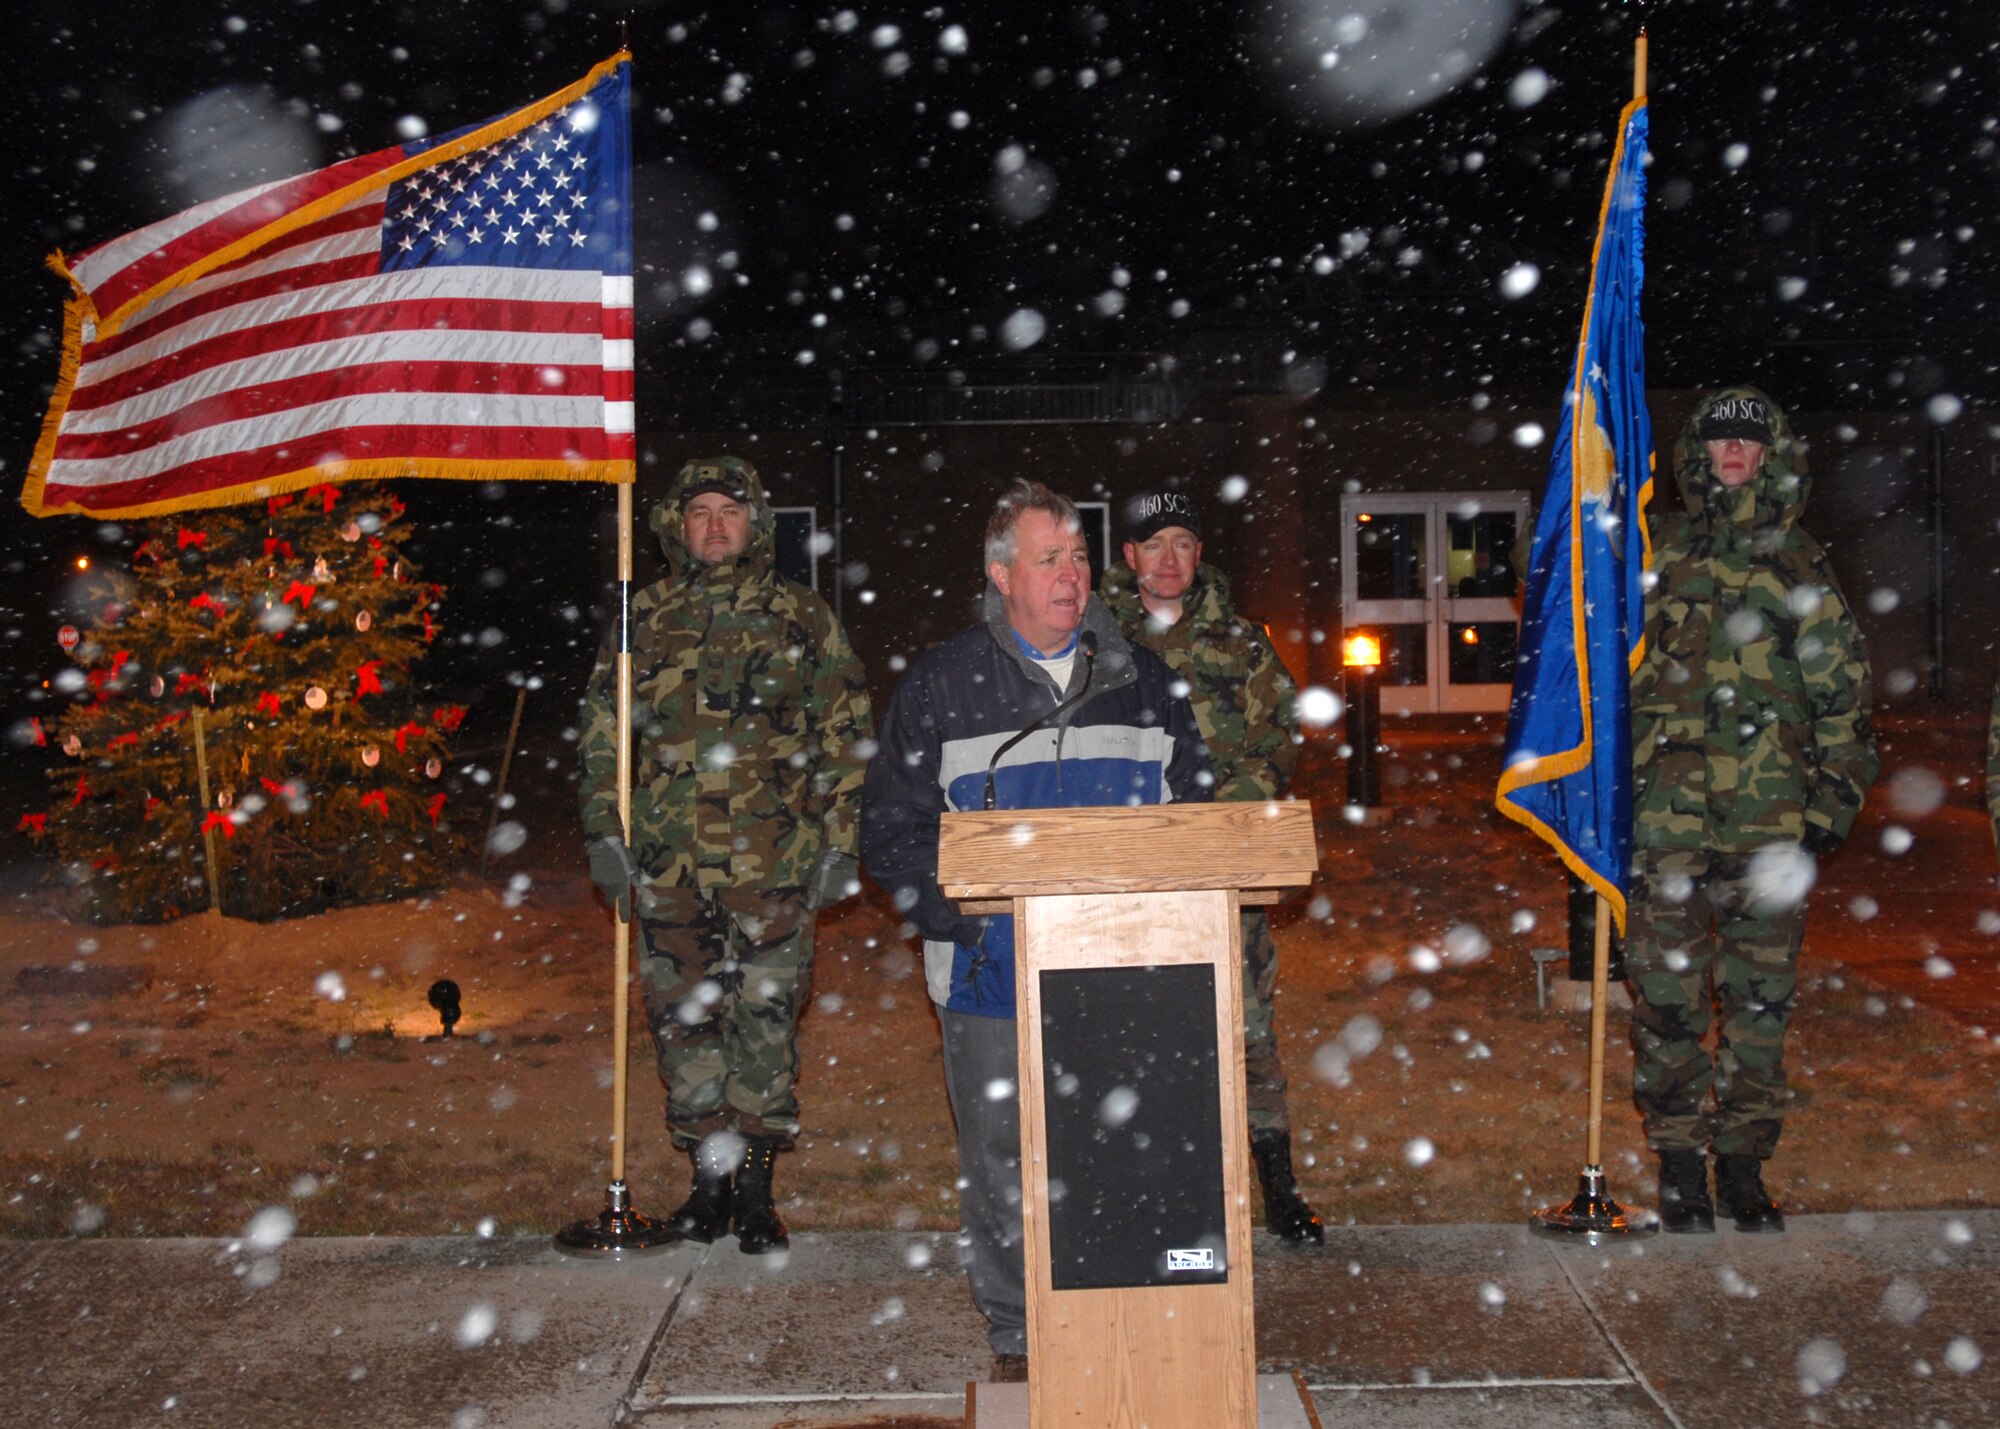 Mr. Craig Mansfield, father of the 460th Space Communications Squadron's Senior Airman Chris Mansfield, warns the 460th SCS tree lighting ceremony audience members of the dangers of drinking and driving Nov. 29. Mr. Mansfield lost his son to a drunk driver about two years ago. The SCS lights the tree in honor of Airman Mansfield. (U.S. Air Force photo by Airman 1st Class Michelle Cross)